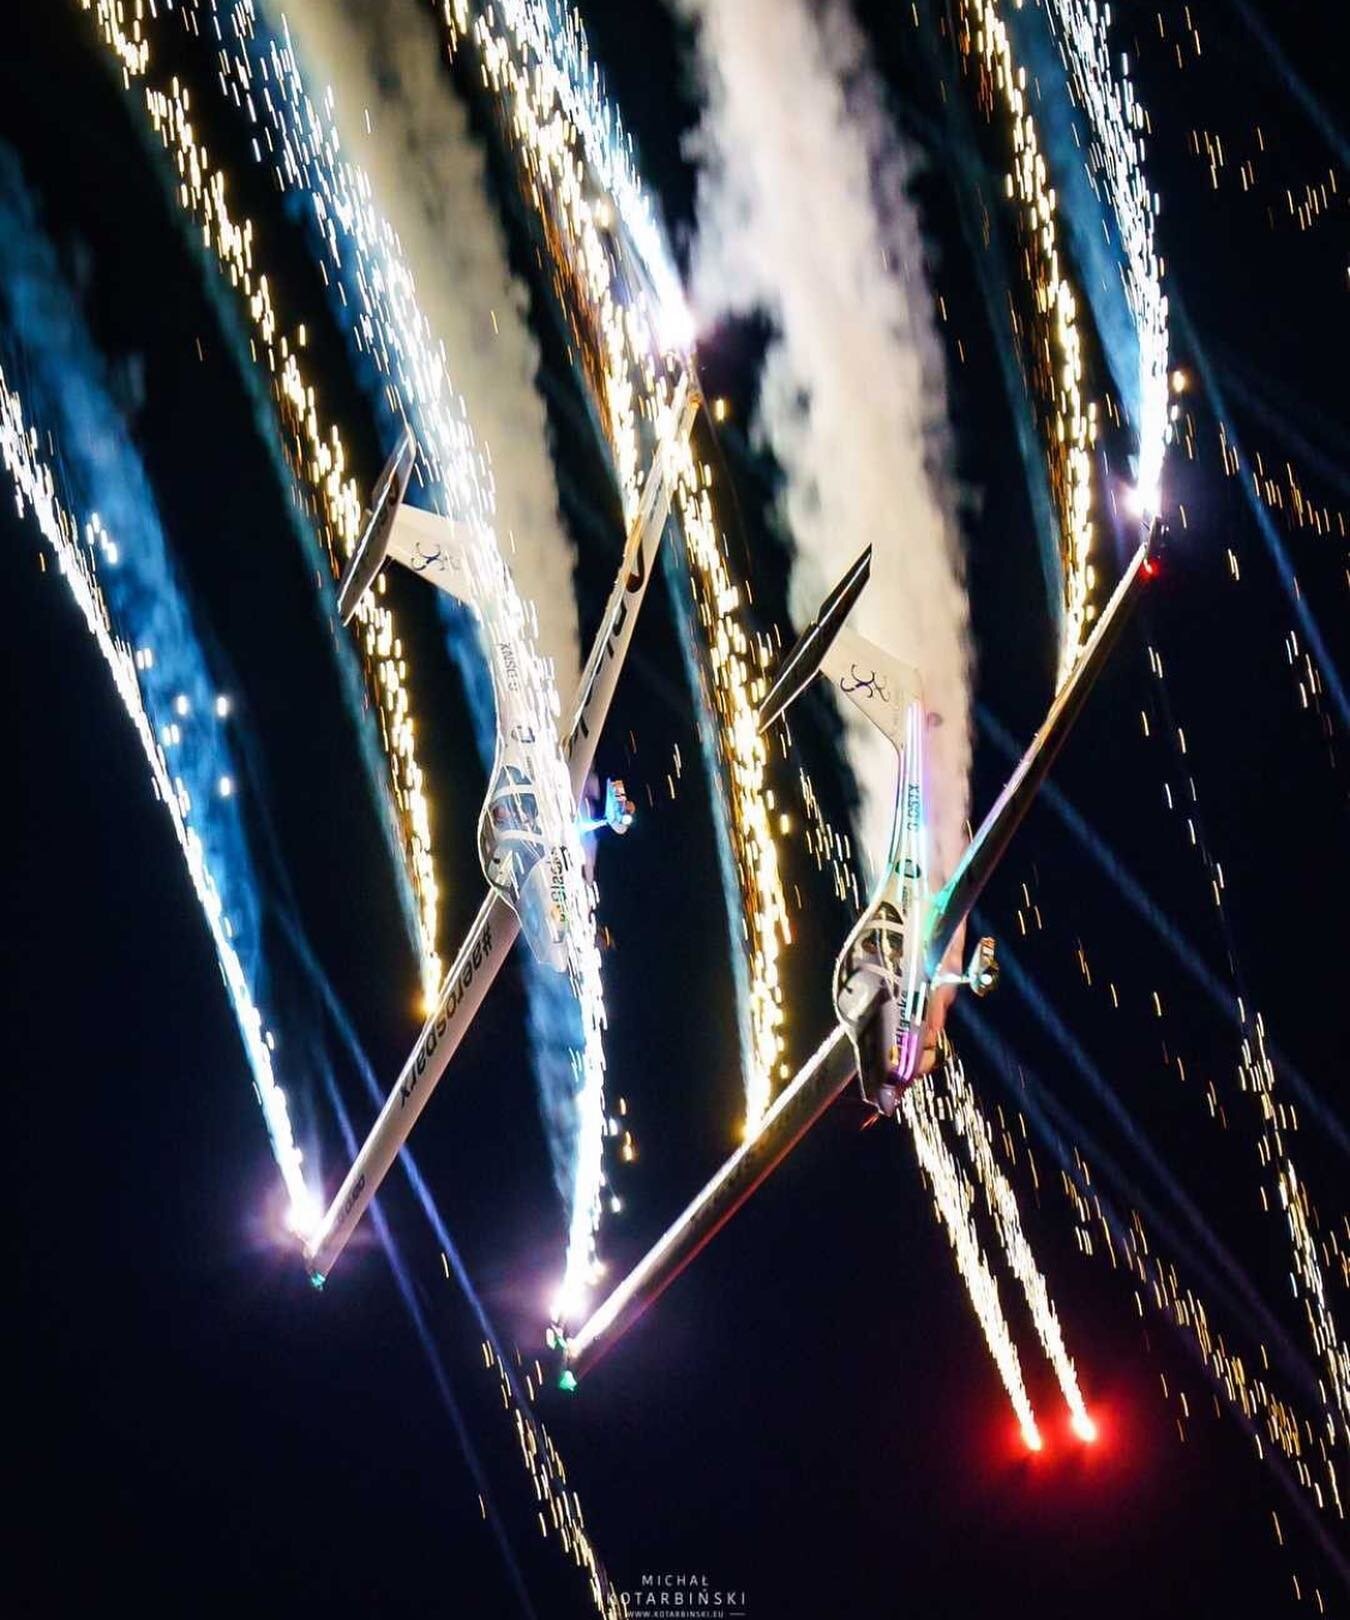 🔥🤙😍🔥🔥 We love seeing cool pictures @michal.kotarbinski.aviation 🙏 @poland  @lotnisko_leszno 🇵🇱🔥🔥🔥 aeroSPARX are the only display team IN THE WORLD to offer displays of formation aerobatics, pyrotechnics, LED and drones - ALL AT NIGHT!  @fl